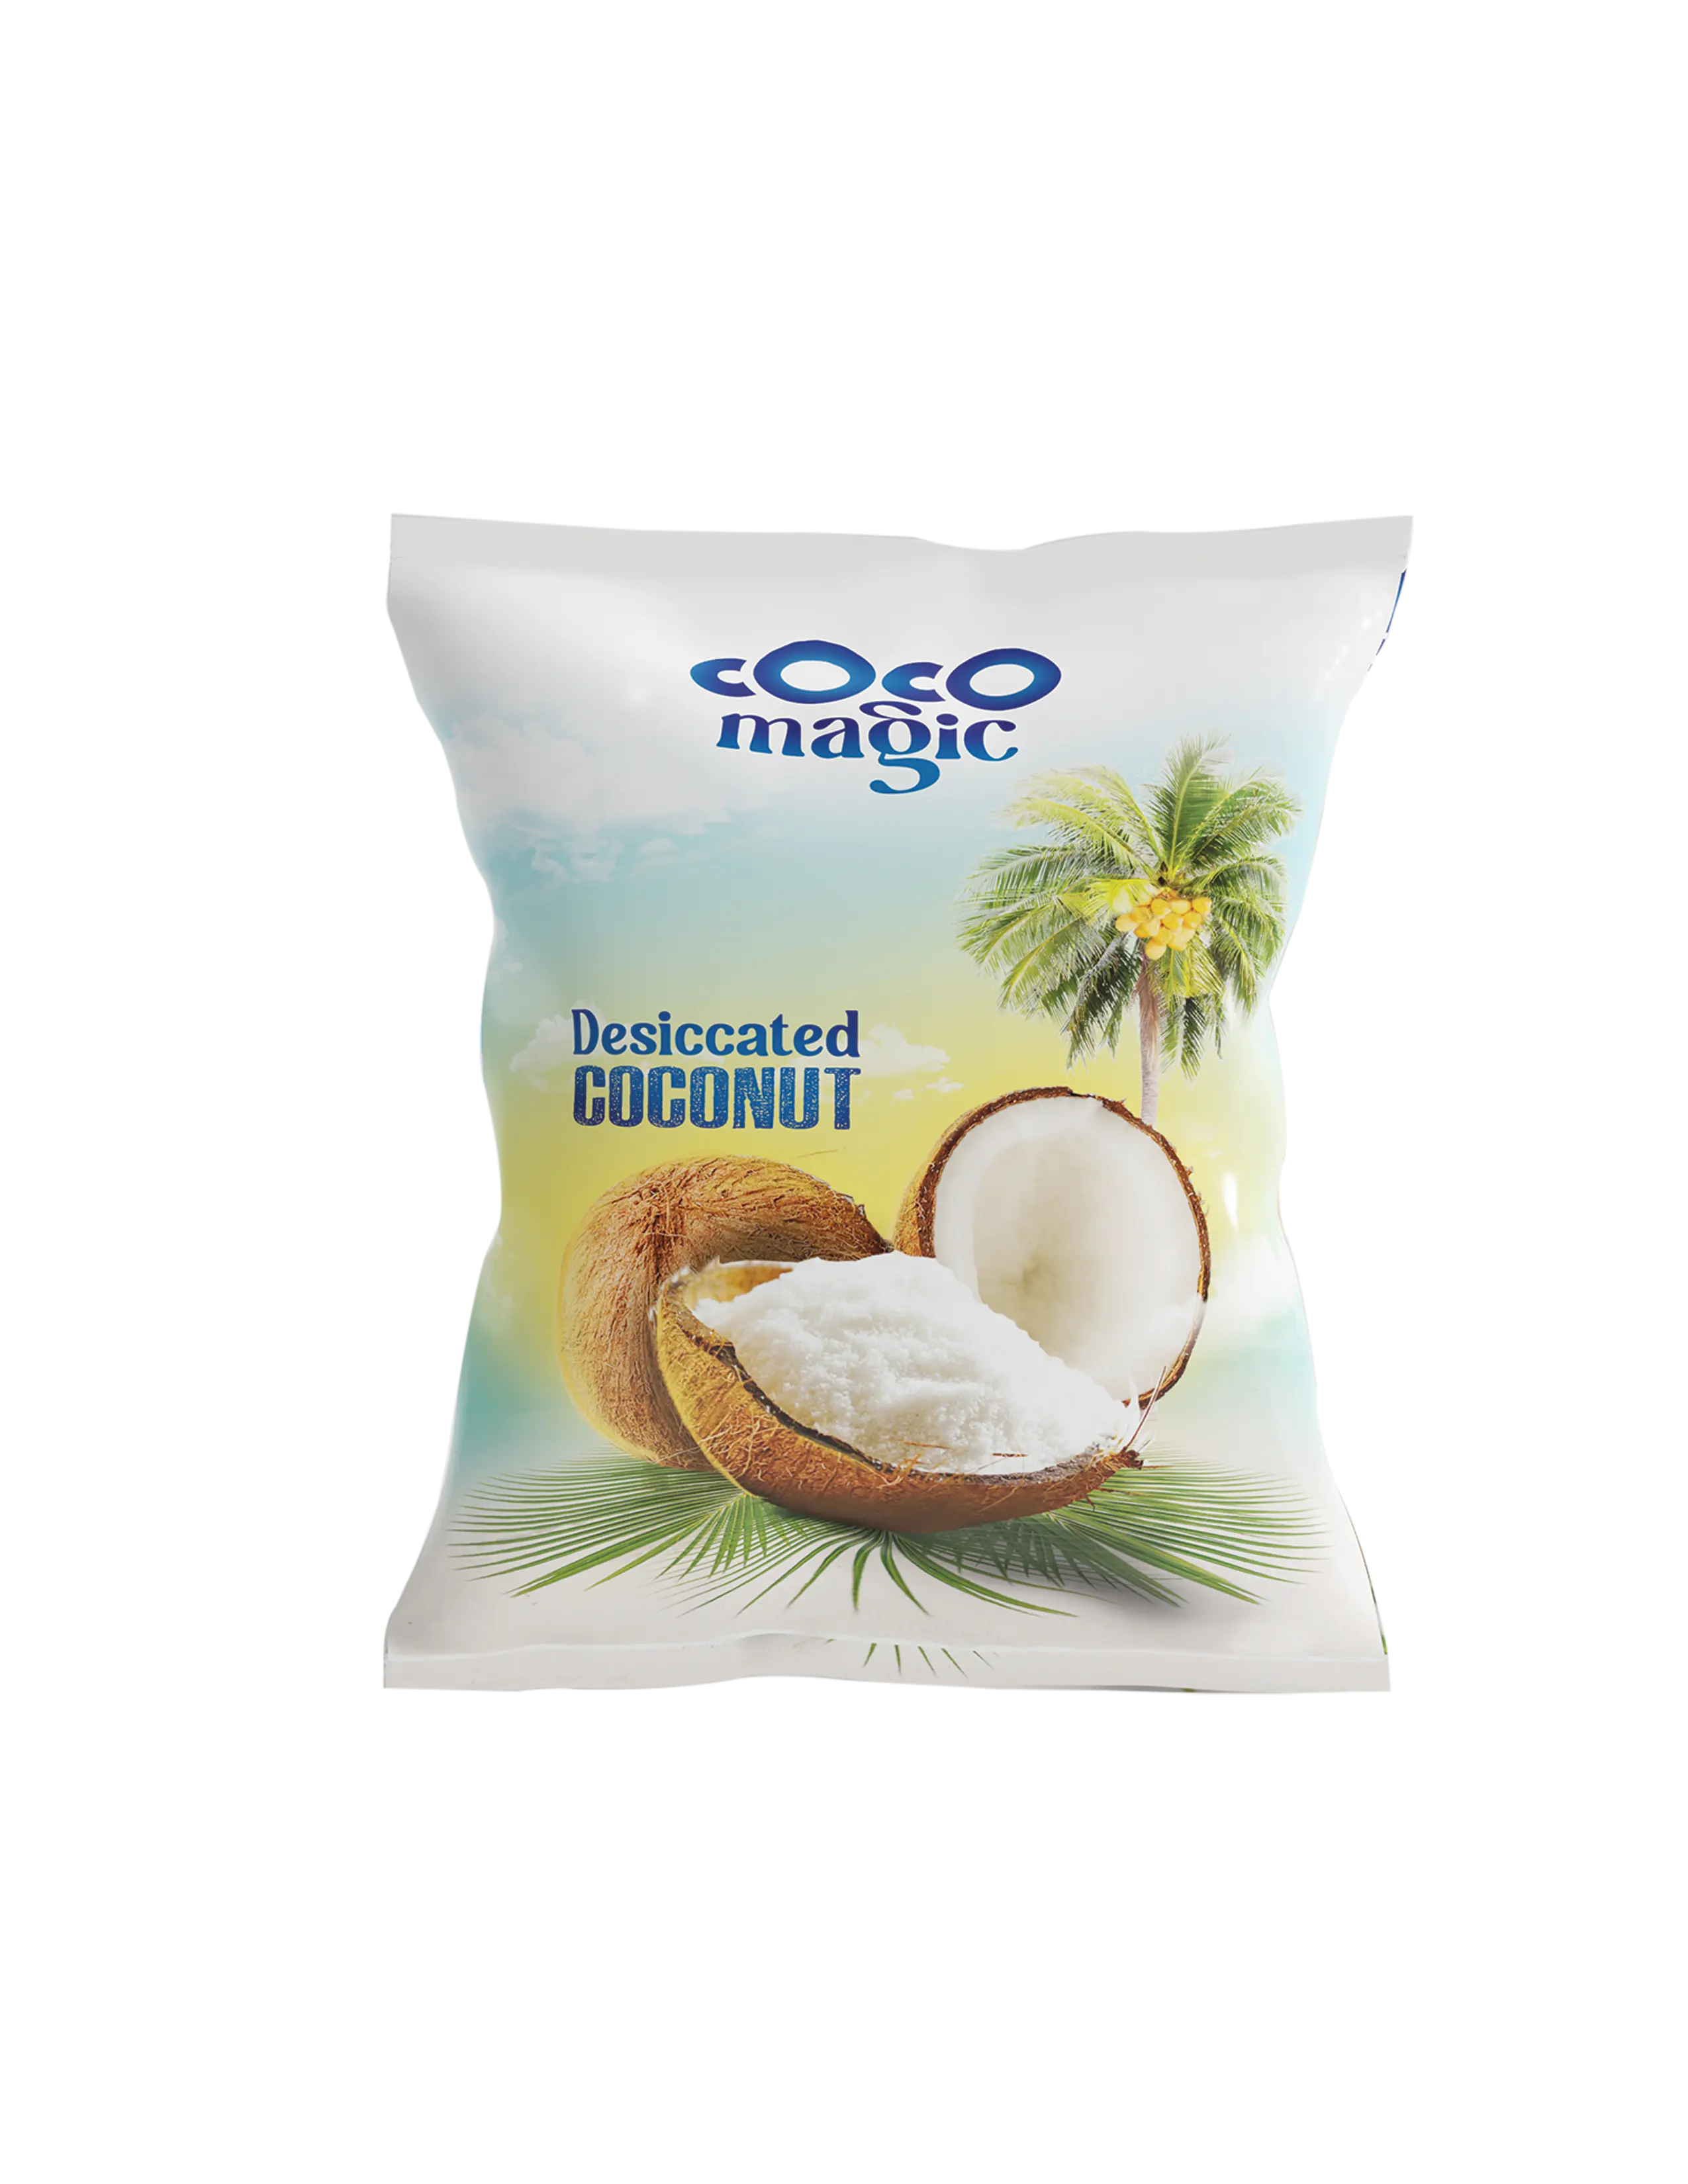 Wholesale High Quality Desiccated Coconut 1kg Exporter From Indian Best Sell Premium Tasteful Coconut Organic and Healthy